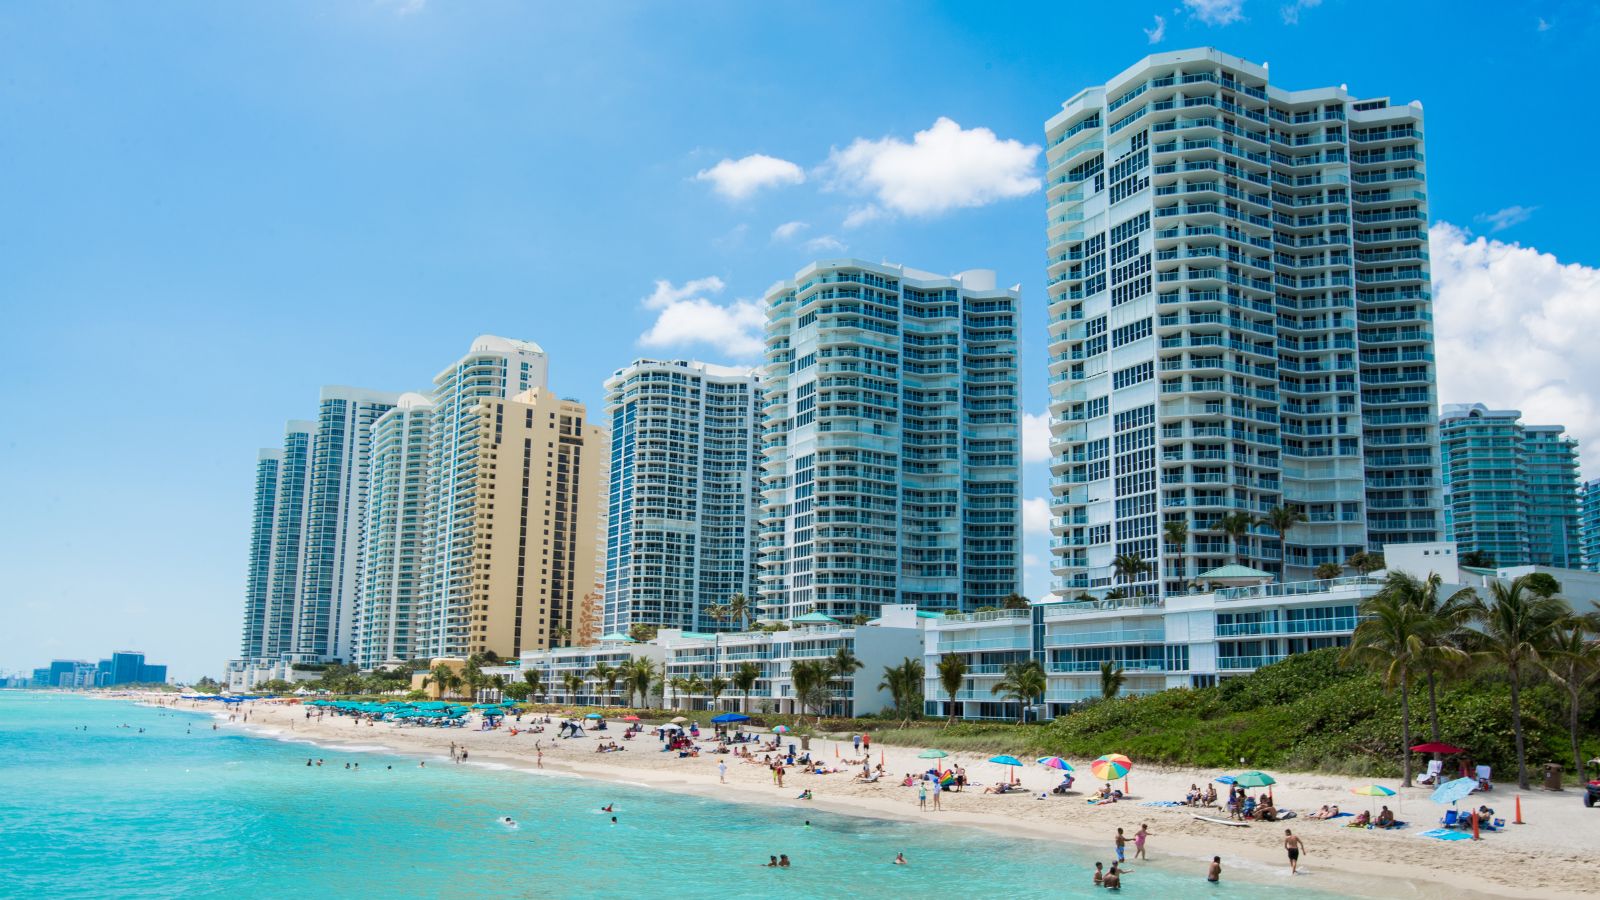 <p>To purchase a house in Sunny Isles Beach, you would have to pay an average of $1.3 million. It’s a city that’s rapidly growing, with lots of luxury resorts being built. Because of this, house prices also seem to be rising at an alarming speed. </p>